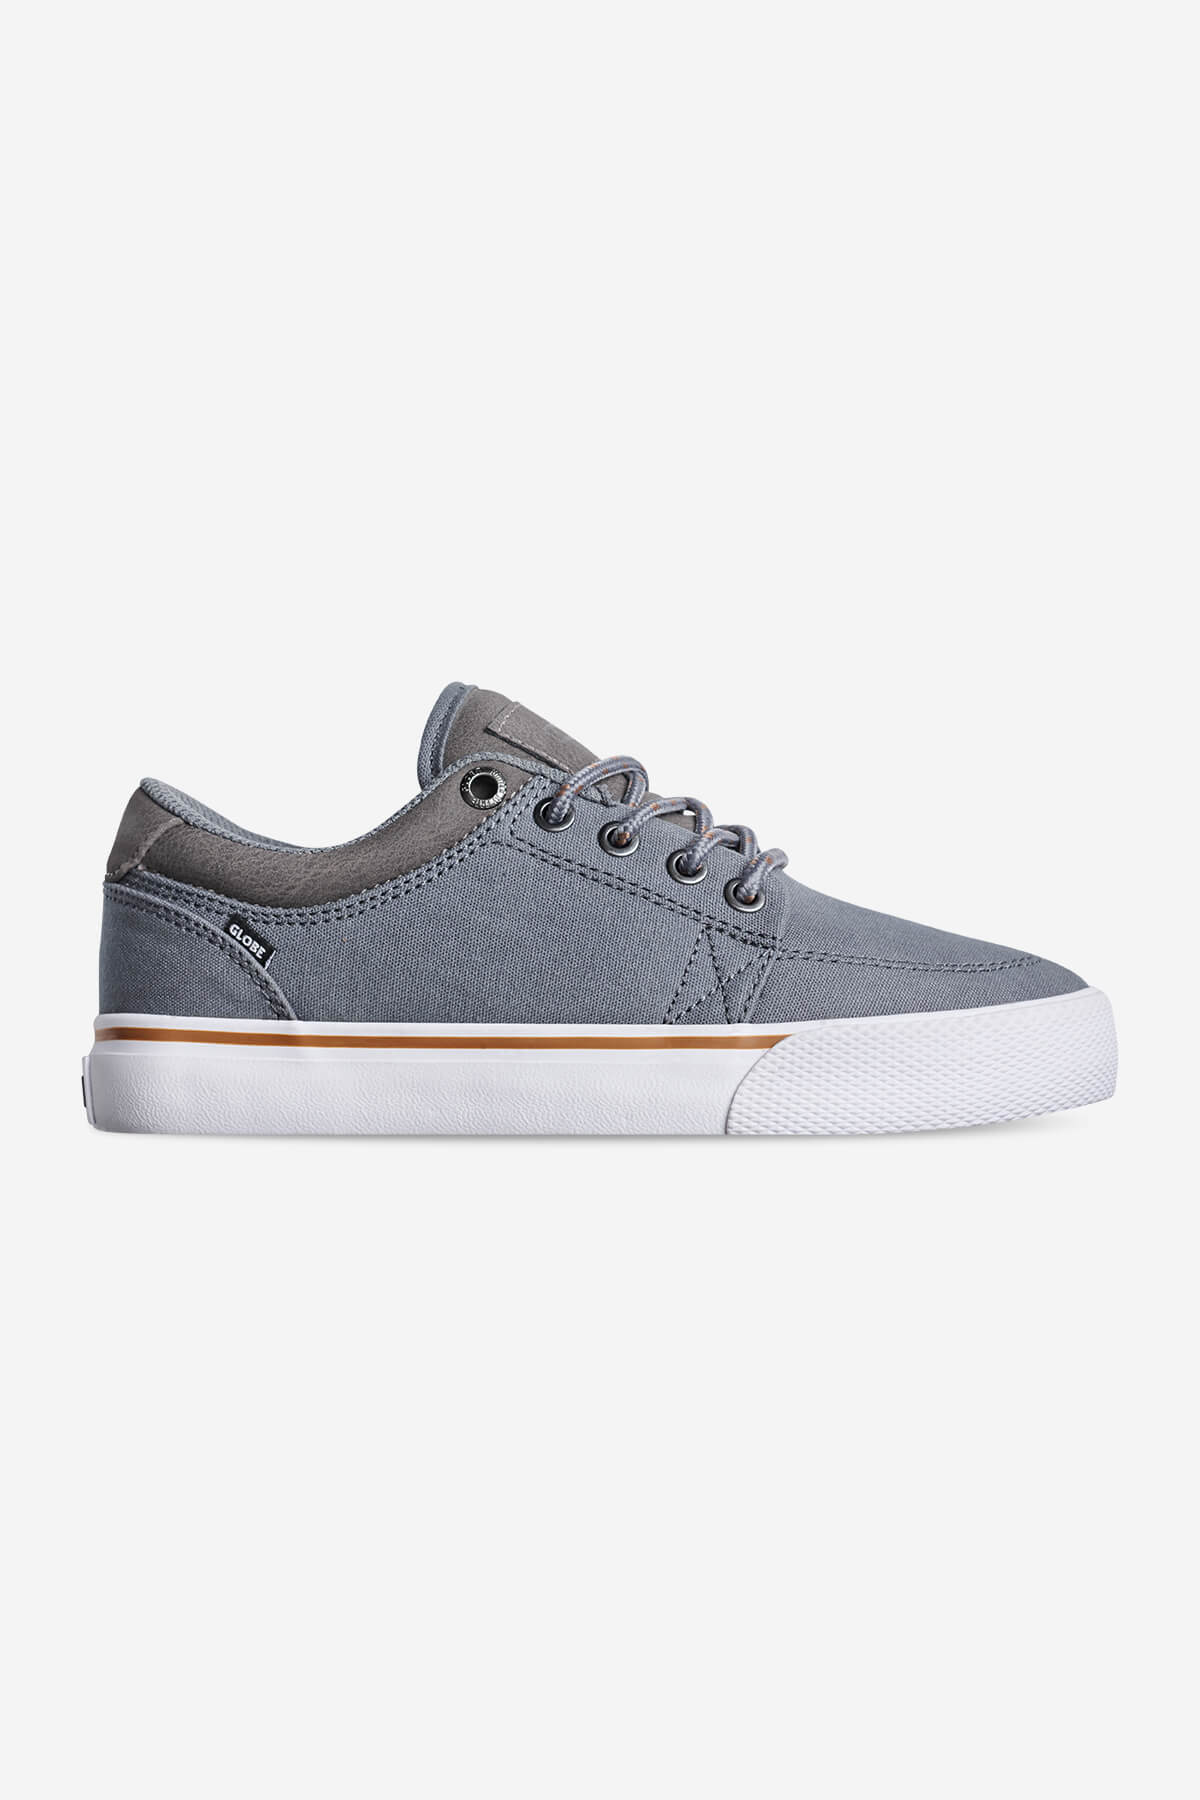 gs-kids toile grise skateboard chaussures